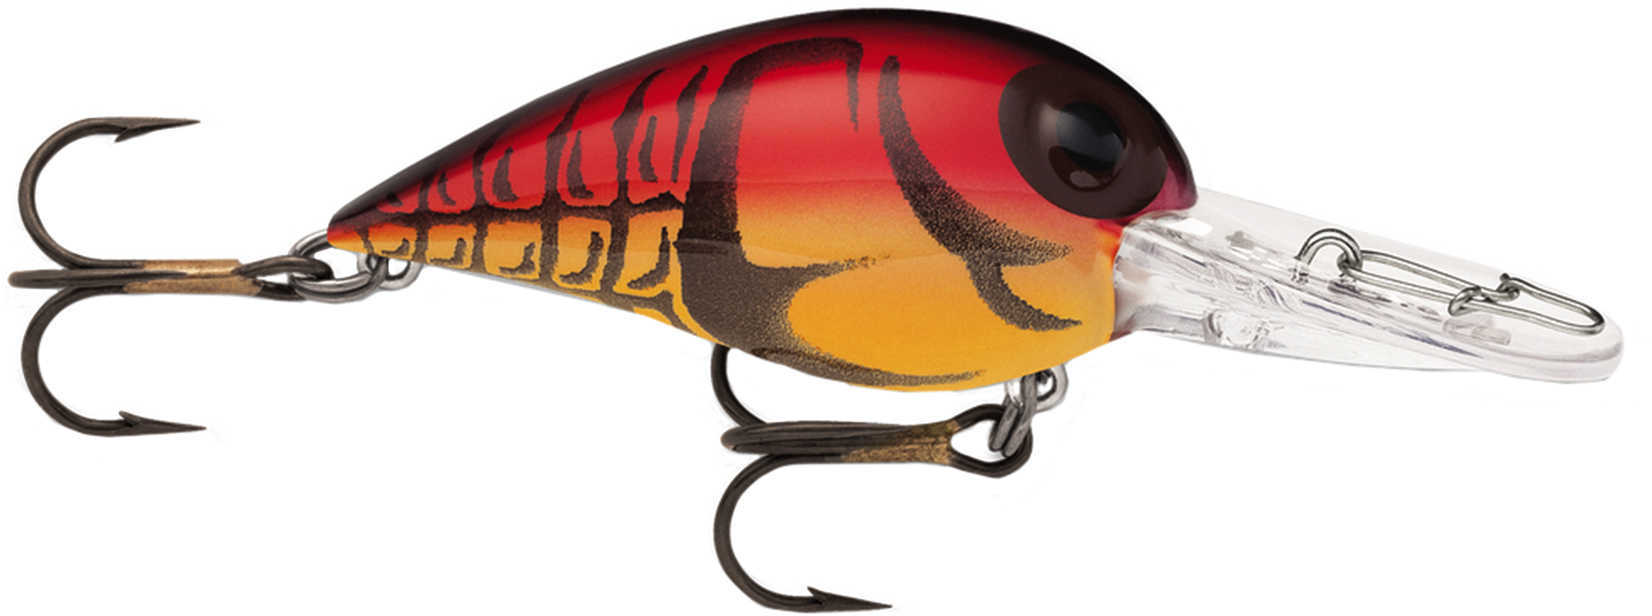 Storm Original Wiggle Wart Lure 2-Inches Number 4 Hook, Red Craw, Per 1 Md: V655